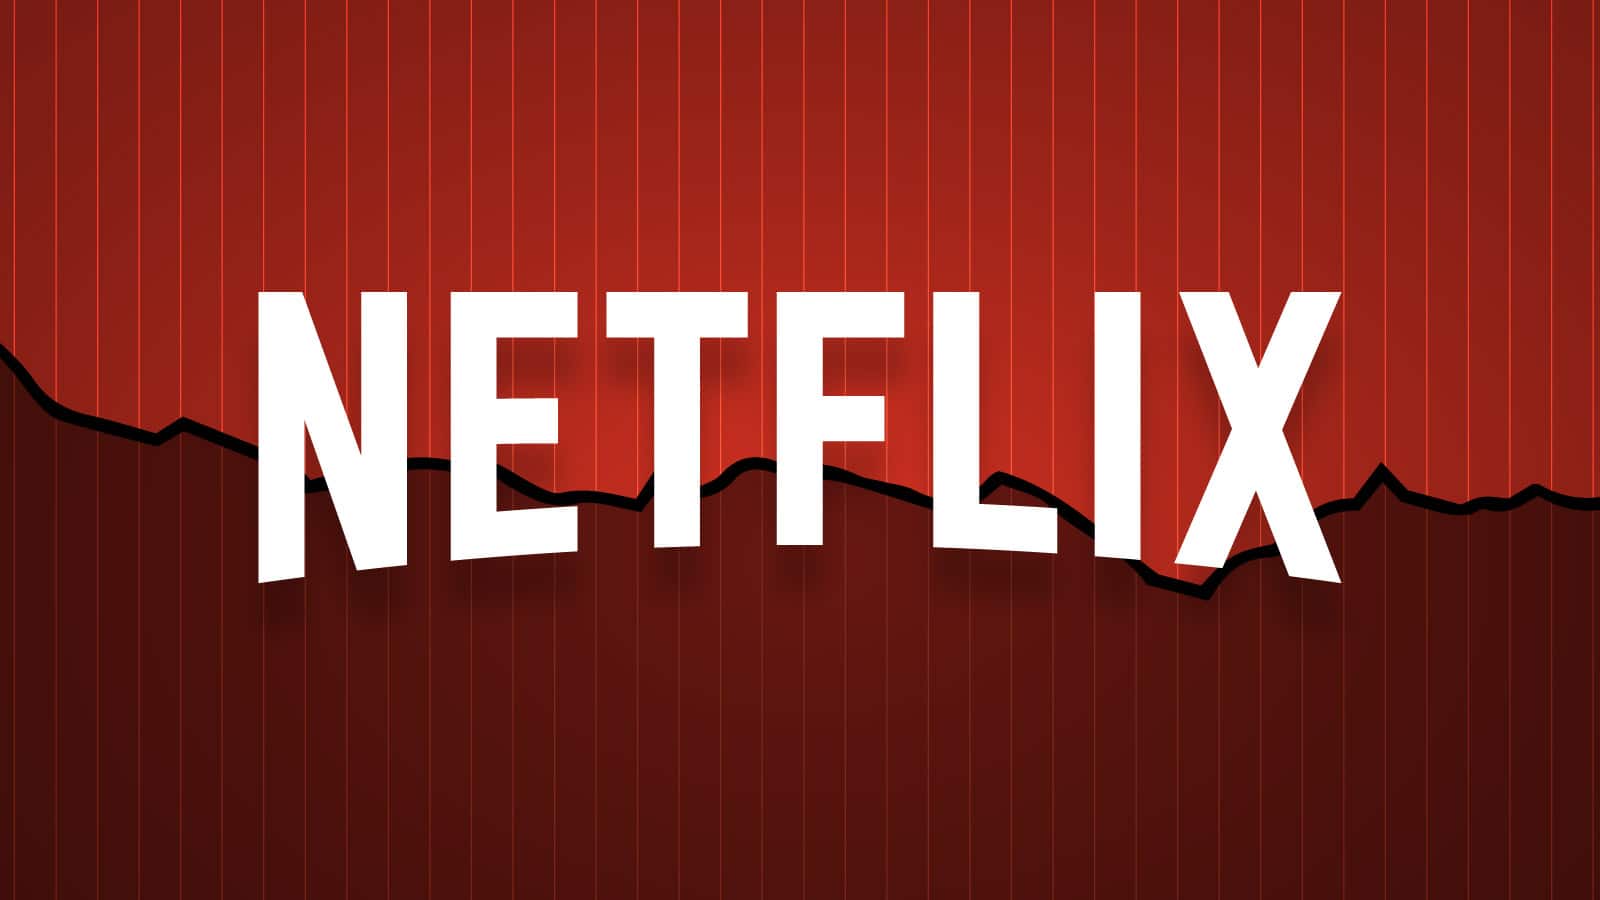 List Of All Shows Debuting On Netflix In ‘November 2018’